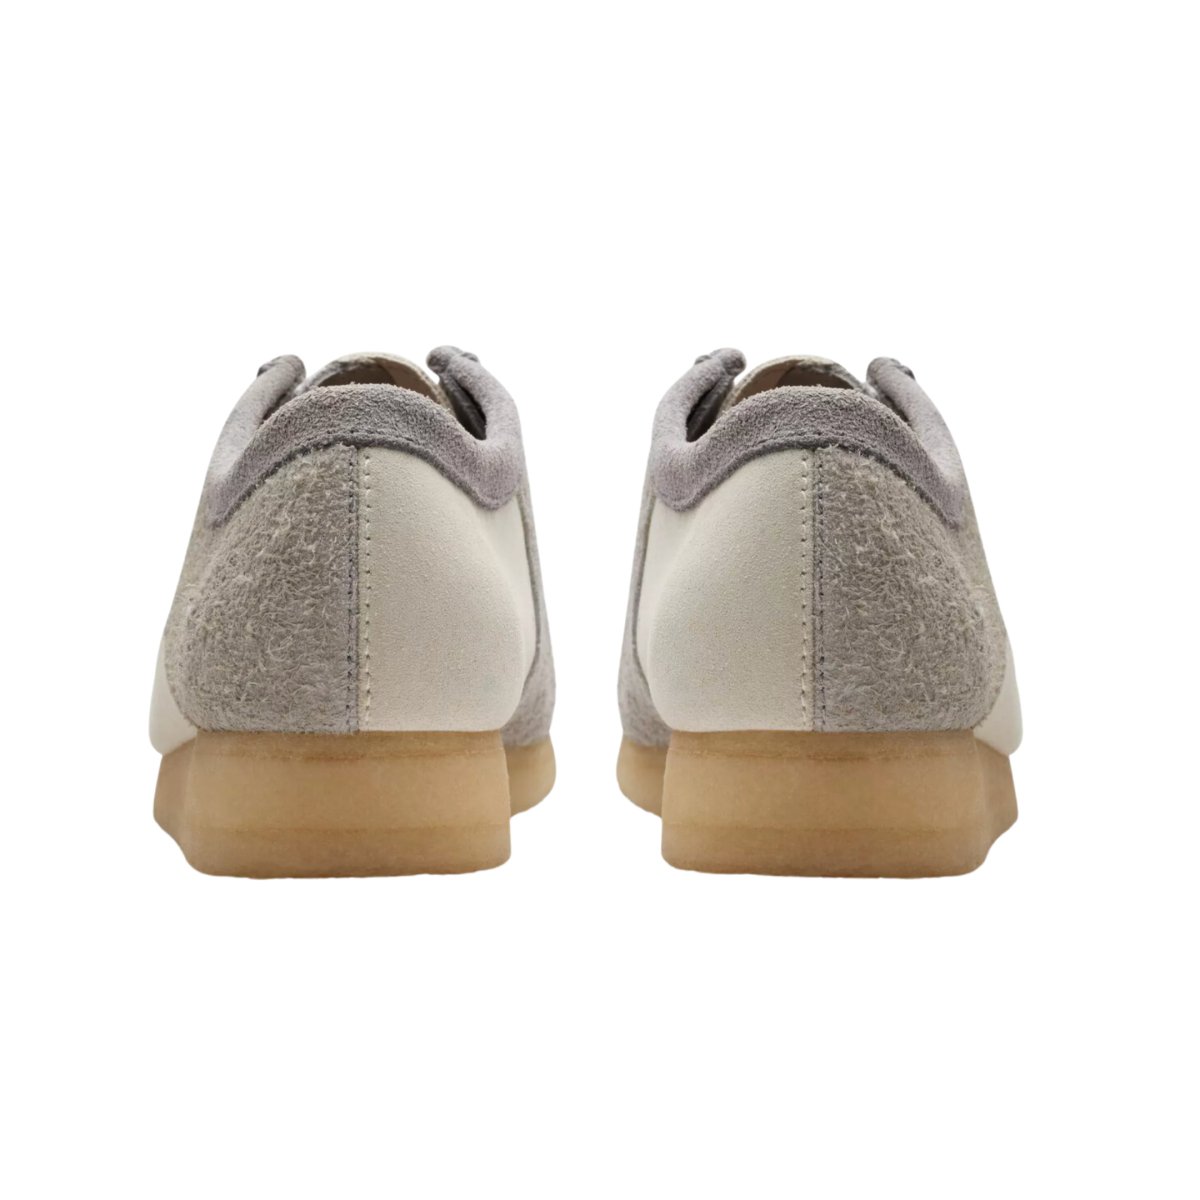 Clarks Men's Wallabee Grey/Off White - 5020930 - West NYC